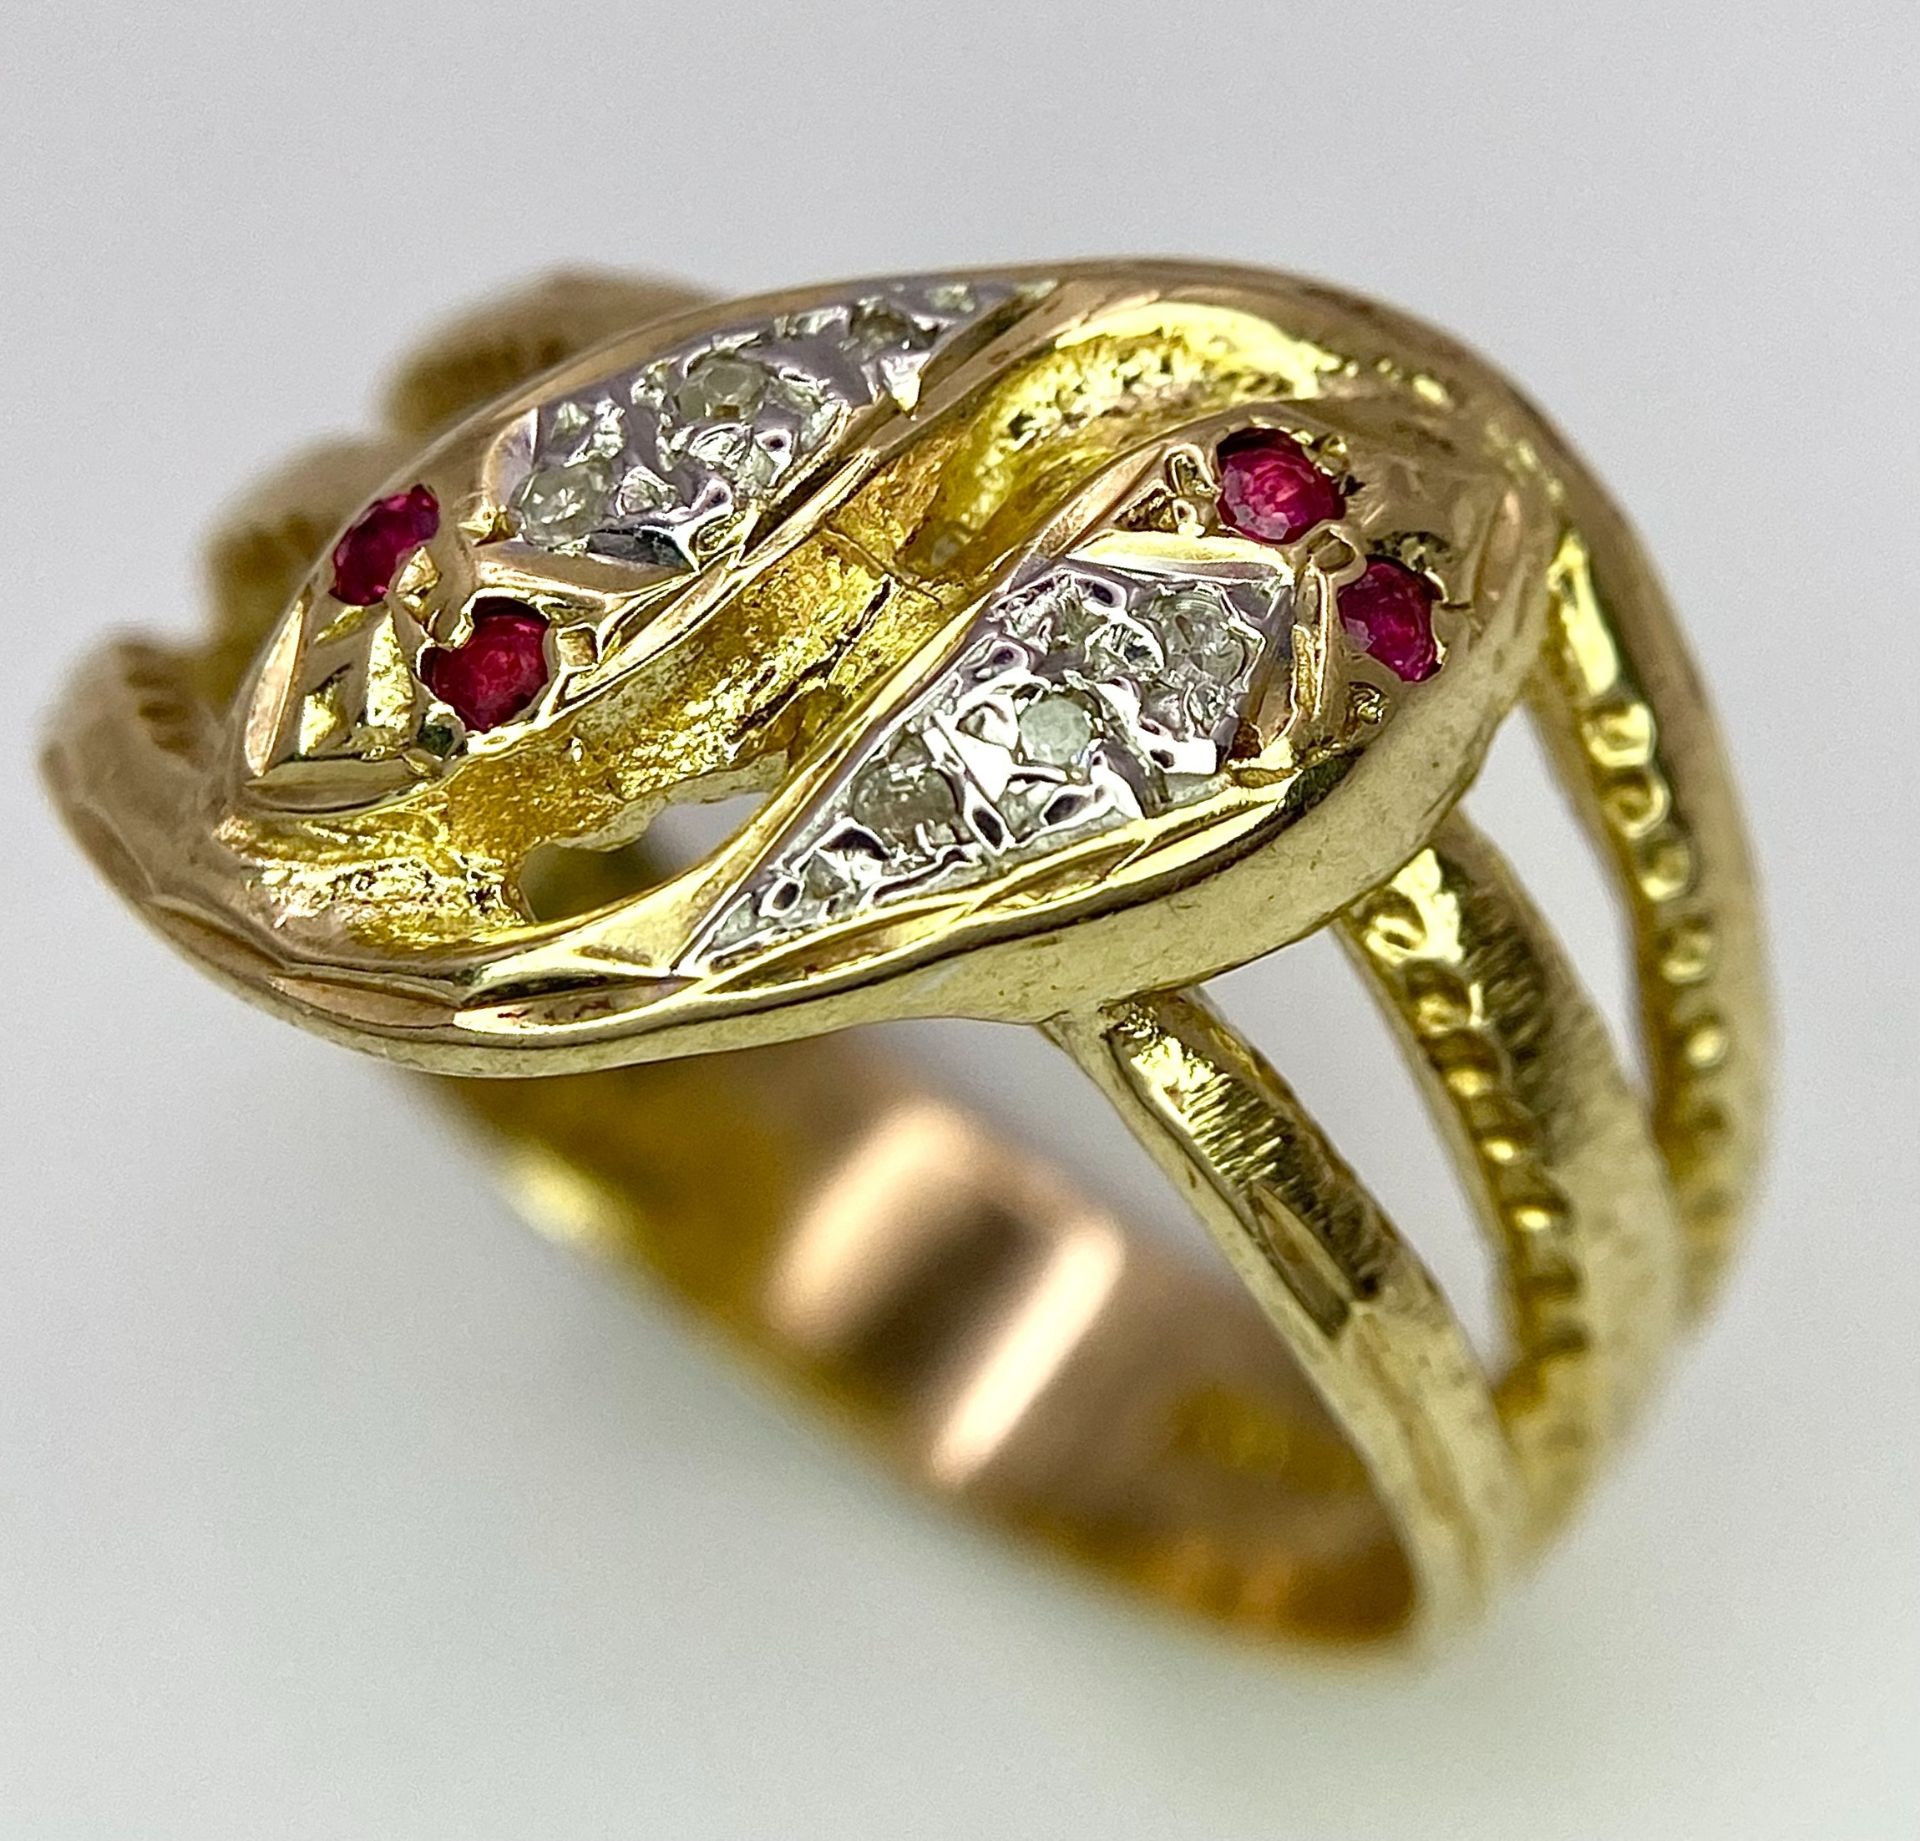 A 9K YELLOW GOLD DIAMOND & RUBY DOUBLE SERPENT RING! 5.3G. SIZE Q. - Image 3 of 6